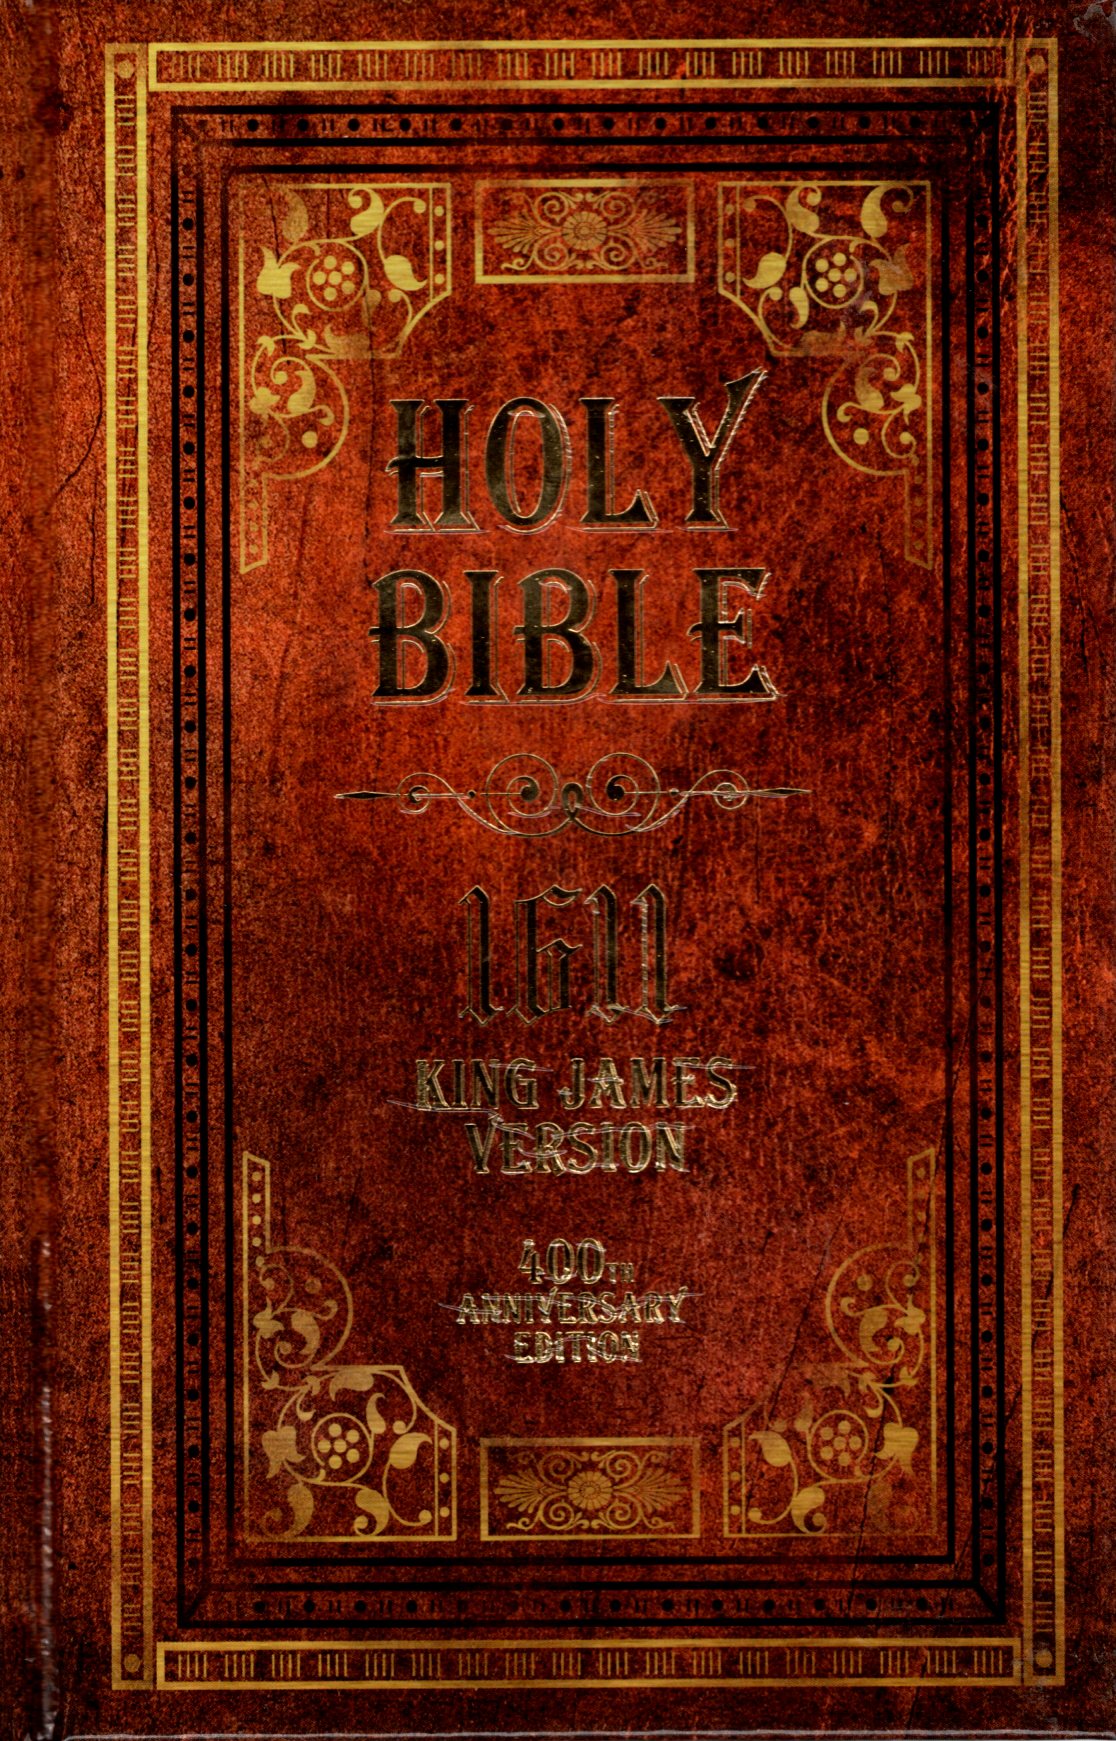 Thomas Nelson KJV Holy Bible 1611 King James Version, 400th Anniversary Edition - Hardcover w/Protective Case